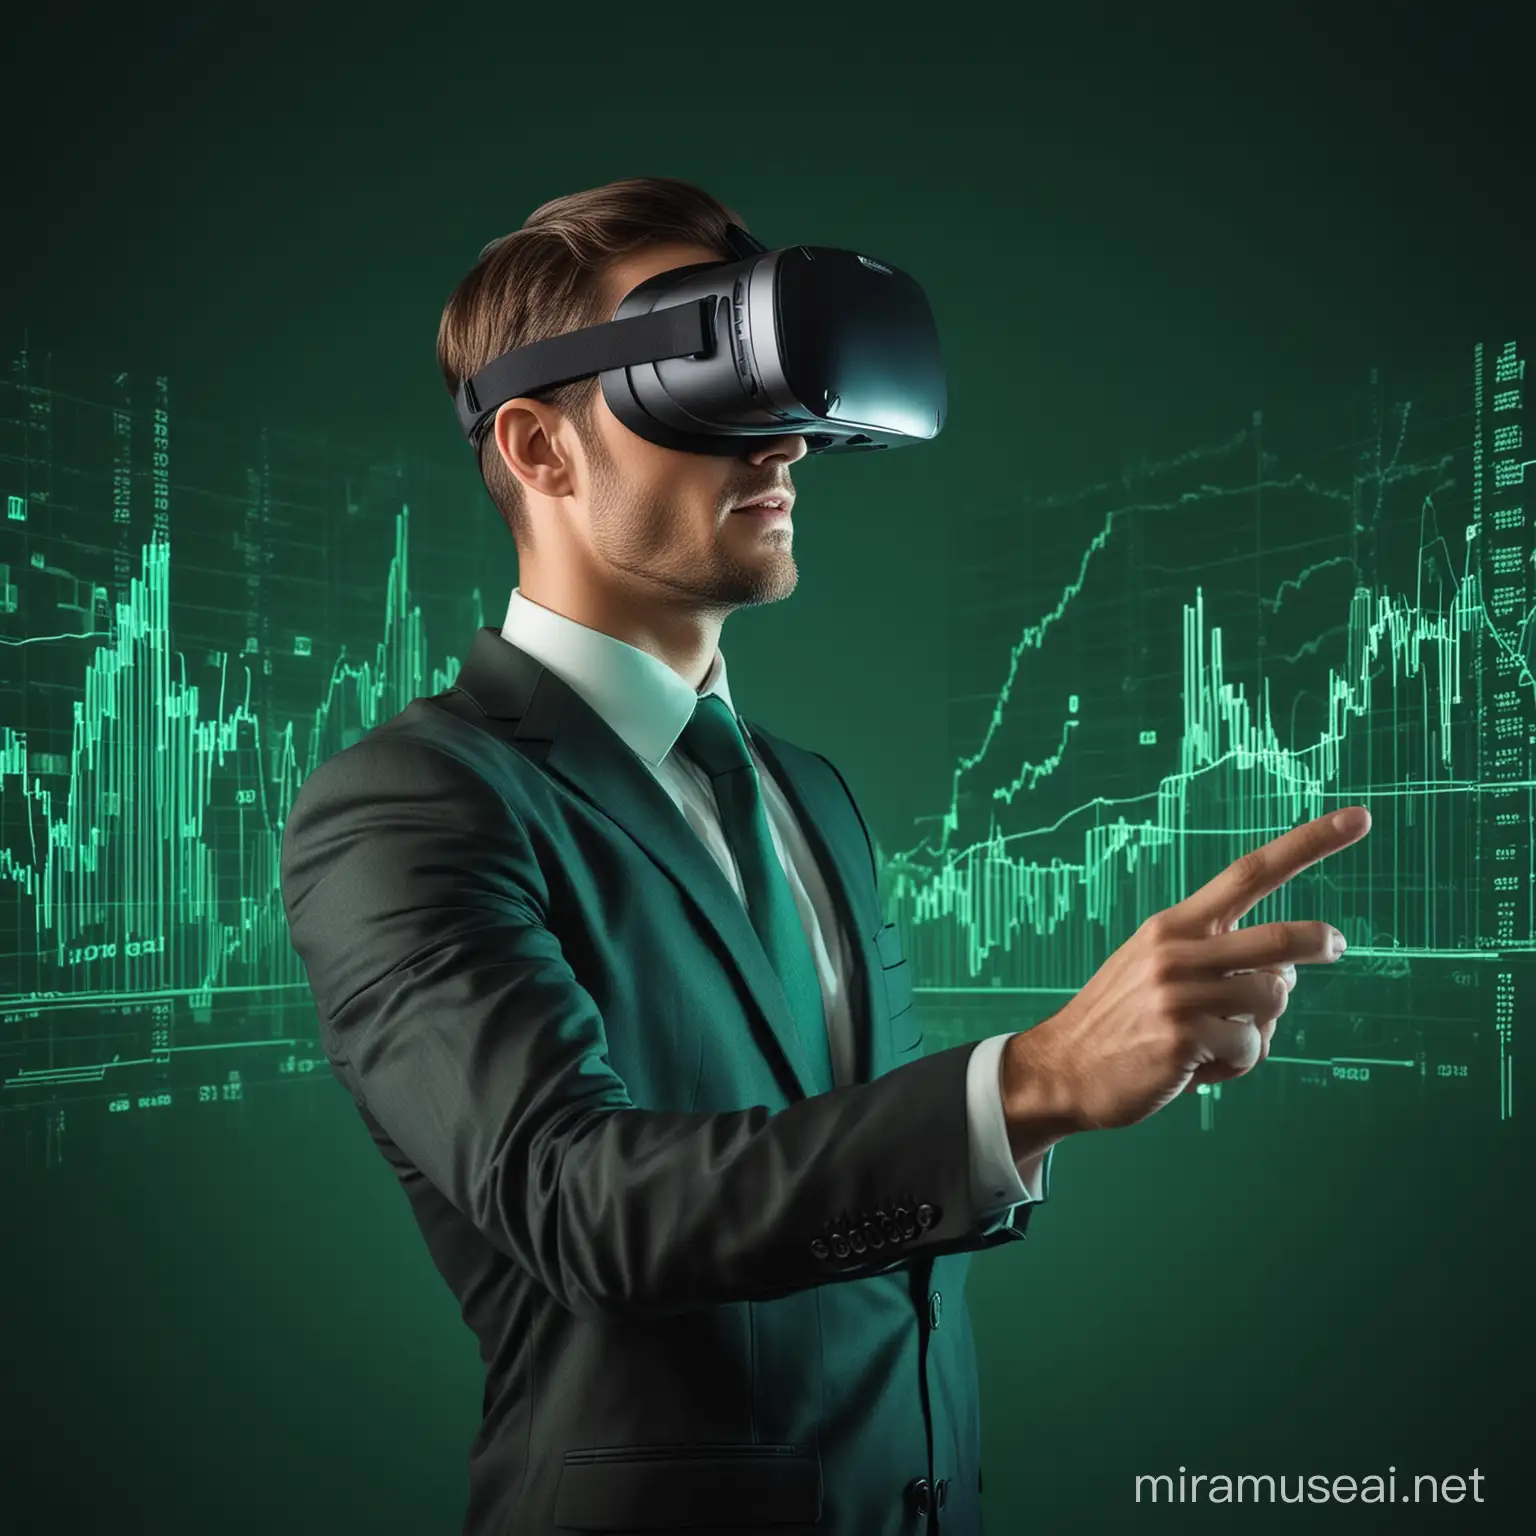 businessman wearing a virtual reality headset while manipulating augmented reality stock trading graphs with his hand, all in shades of tiffany green lighting against a dark green background